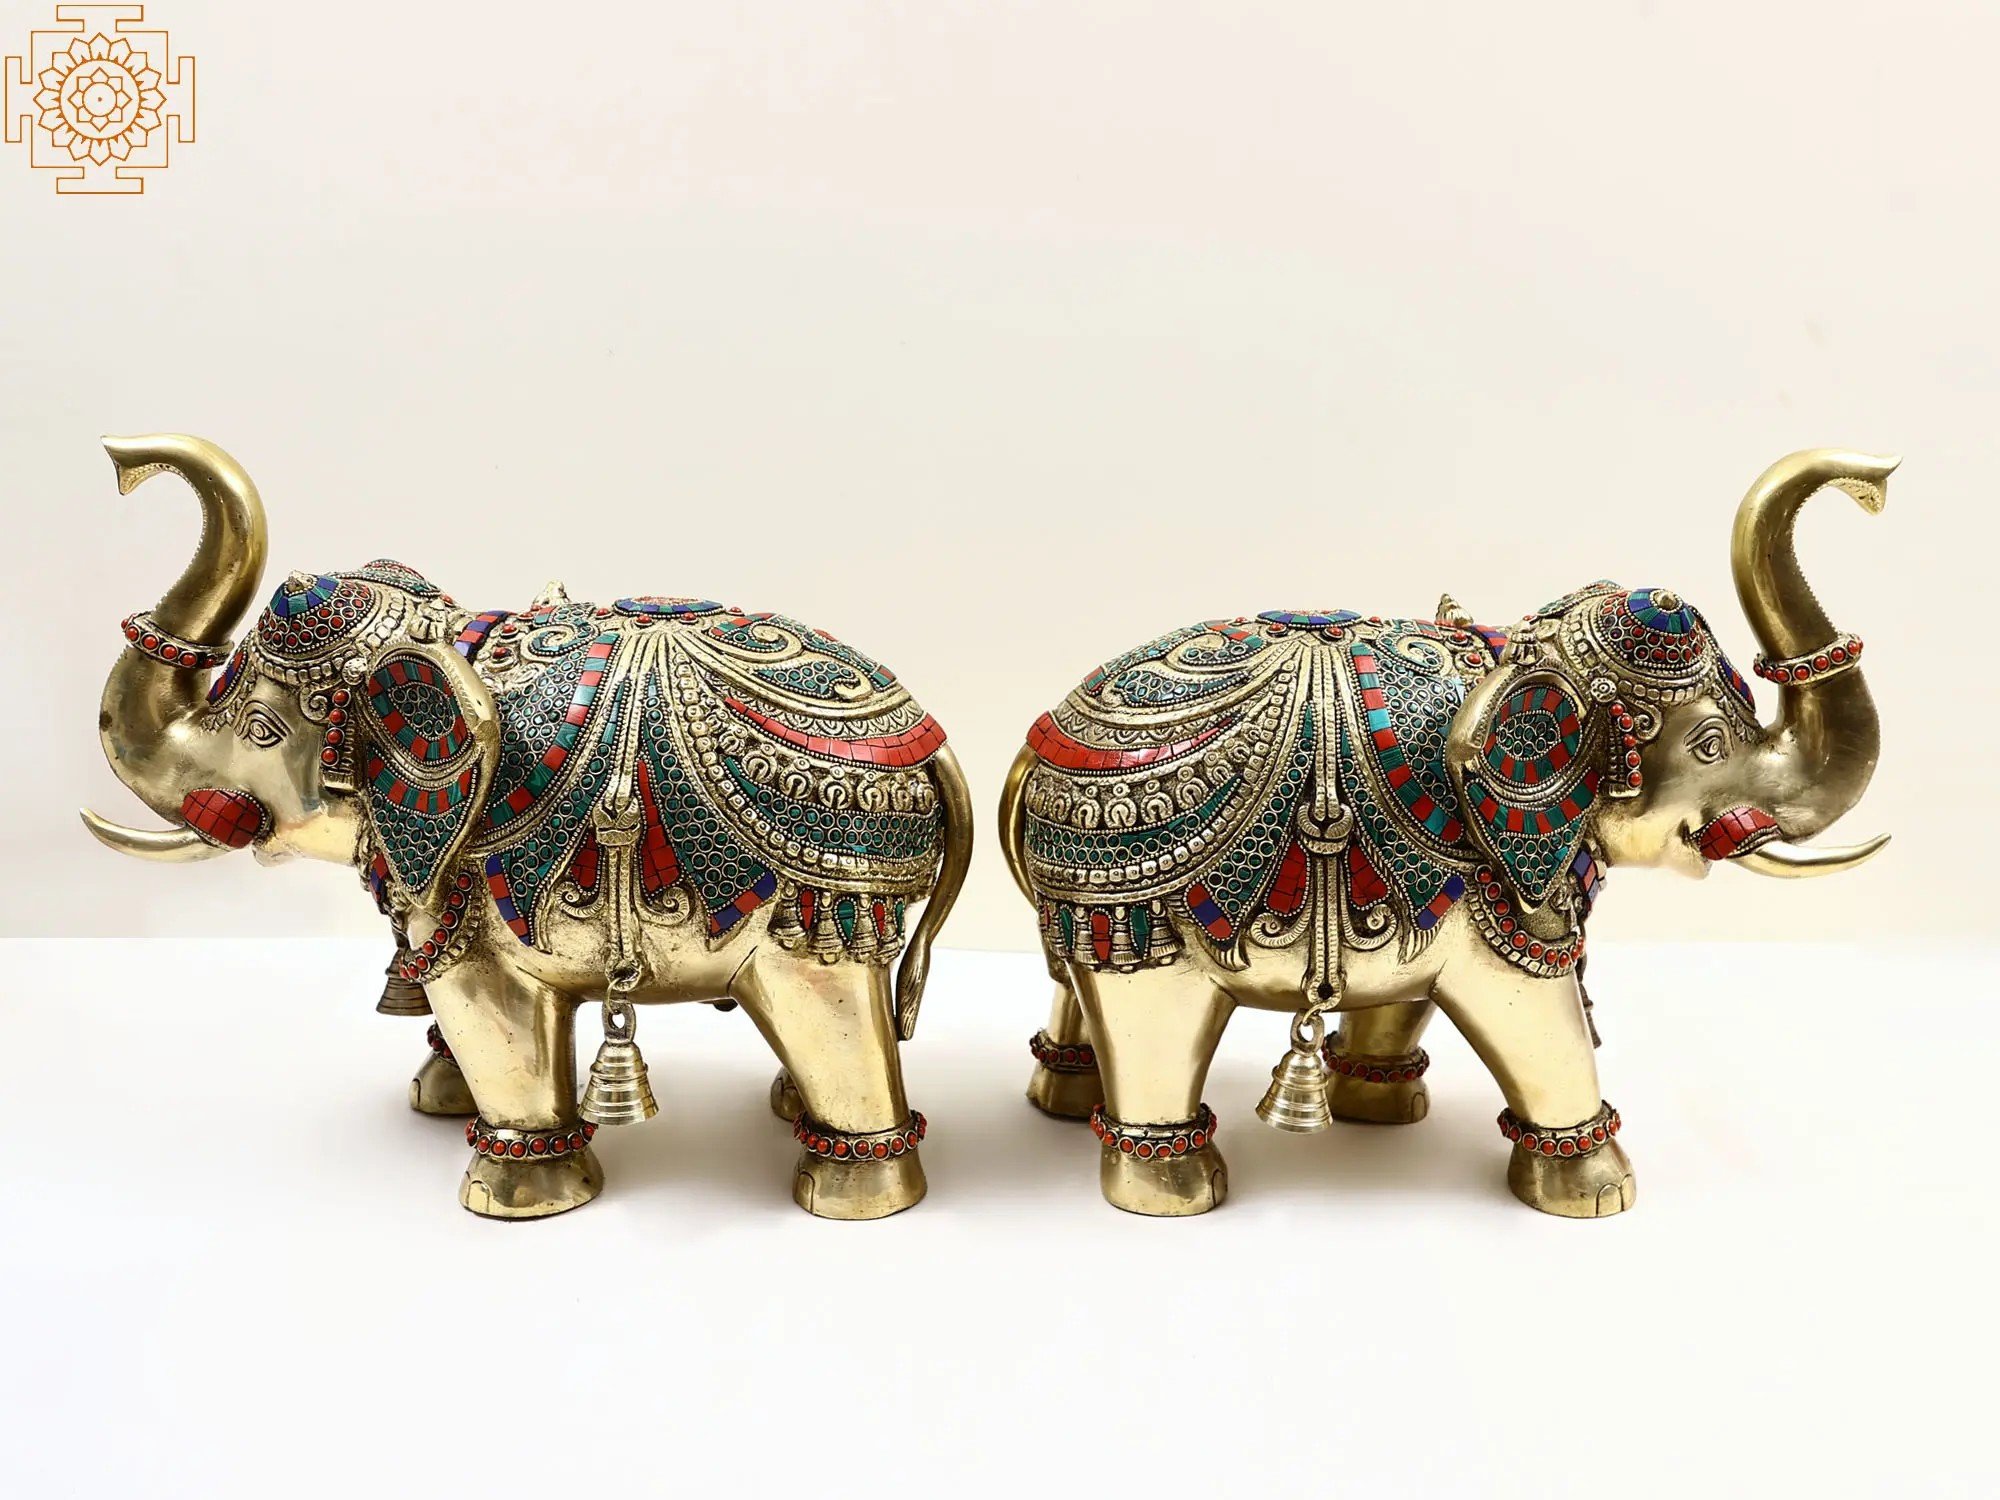 Details about   2 Brass Elephants Inlayed on a Decorative Carved Wooden Box 